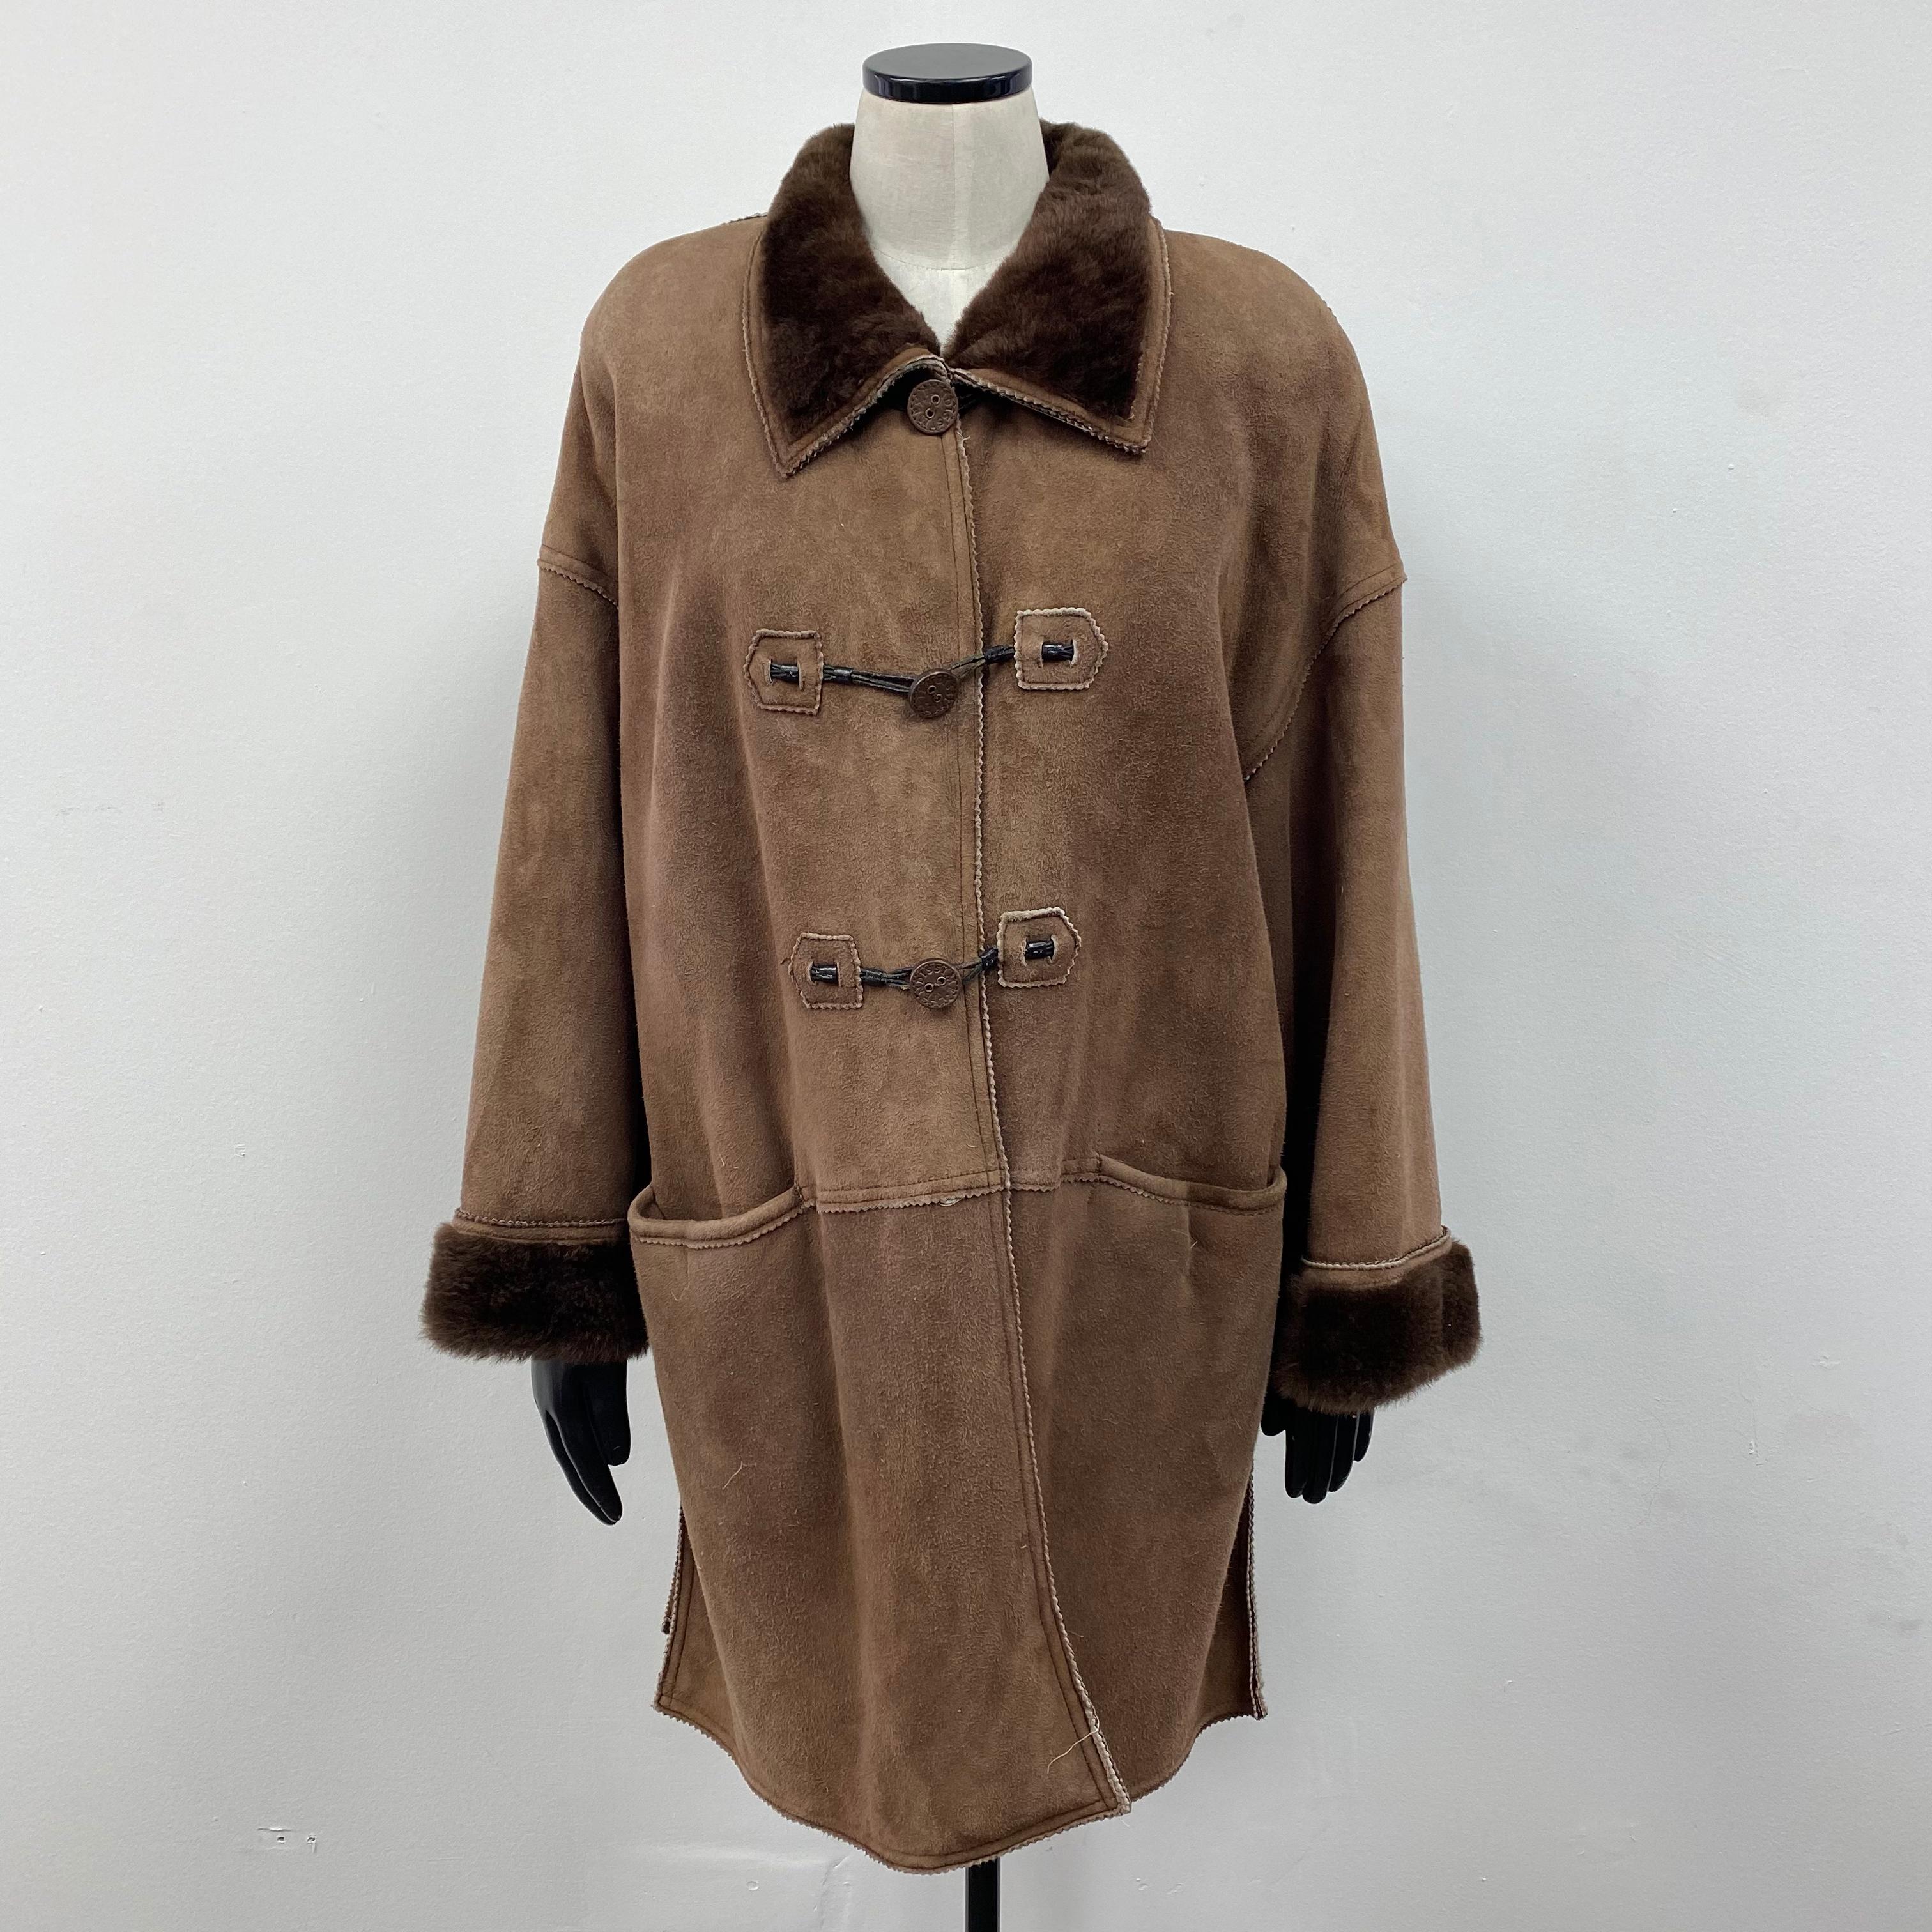 PRODUCT DESCRIPTION:

Fendi Fendissime for Holt Renfrew Italian Shearling Fur Coat in a beautiful chestnut color

Condition: Good

Closure: Leather Buttons

Color: Brown

Material: Shearling

Garment type:  Shearling coat

Sleeves: Dolman with